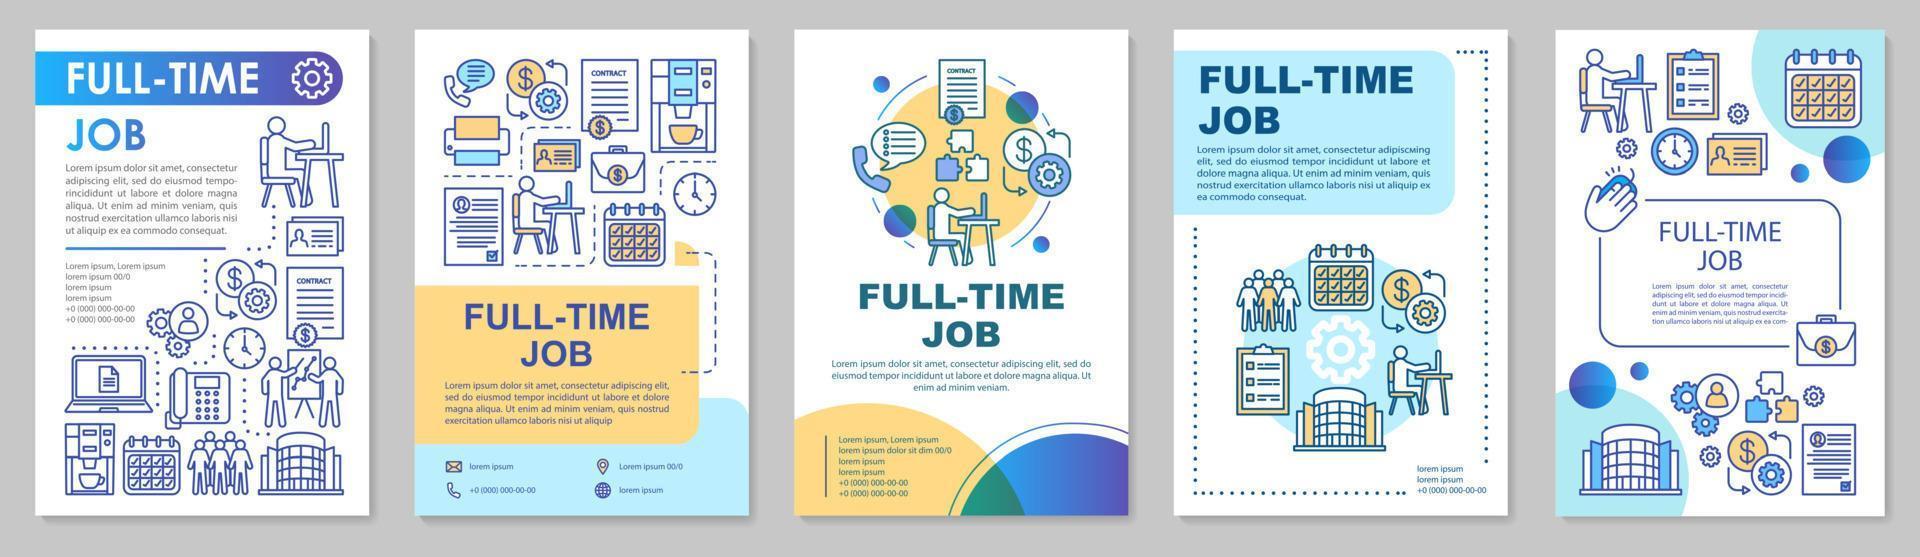 Full-time job brochure template layout. Employment, recruitment. Employee hiring. Flyer, booklet, leaflet print design with linear illustrations. Vector page layouts for magazines, advertising posters